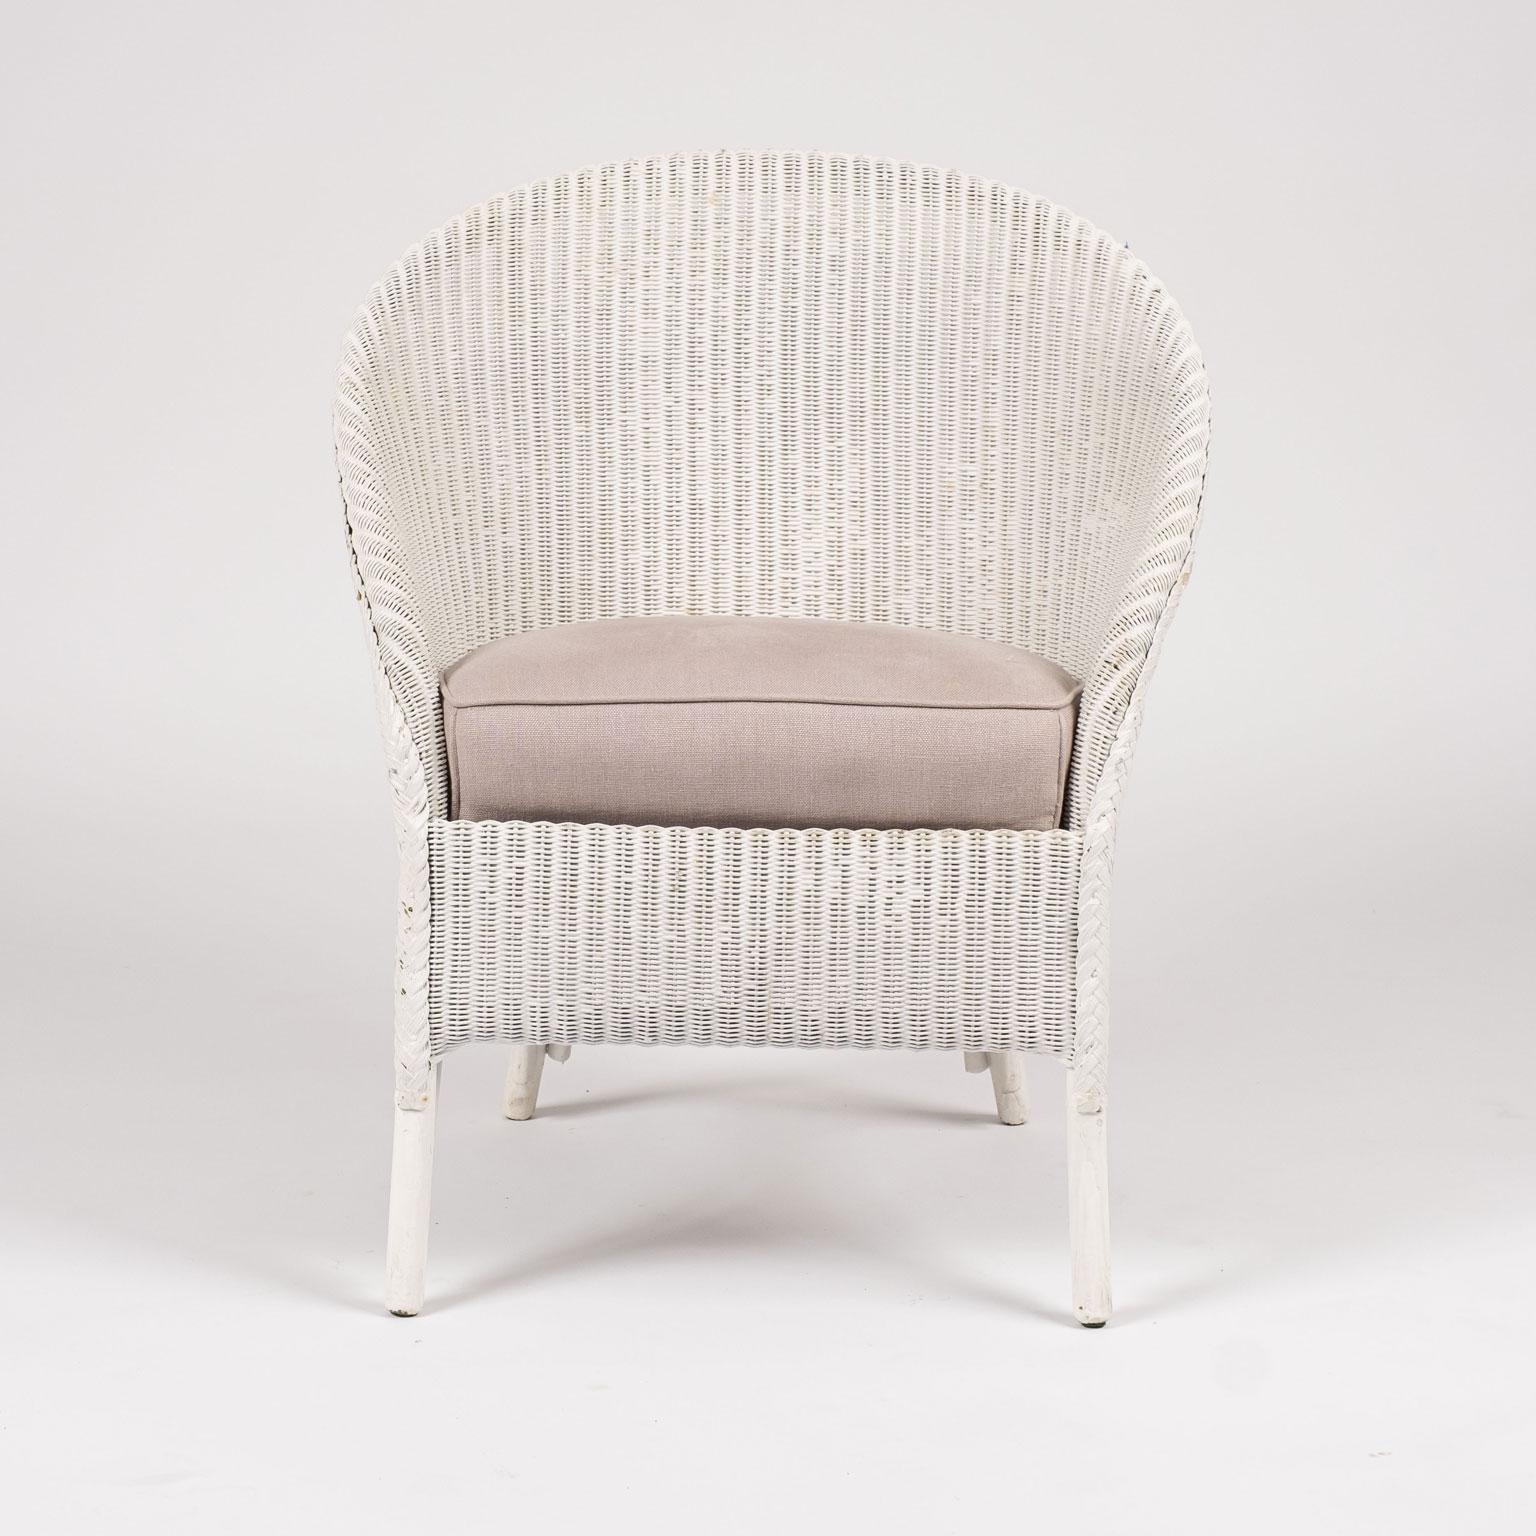 Lloyd Loom style white painted wicker chair. Sturdy, stabile condition with original steel spring seat. Upholstered in light color lavender linen.